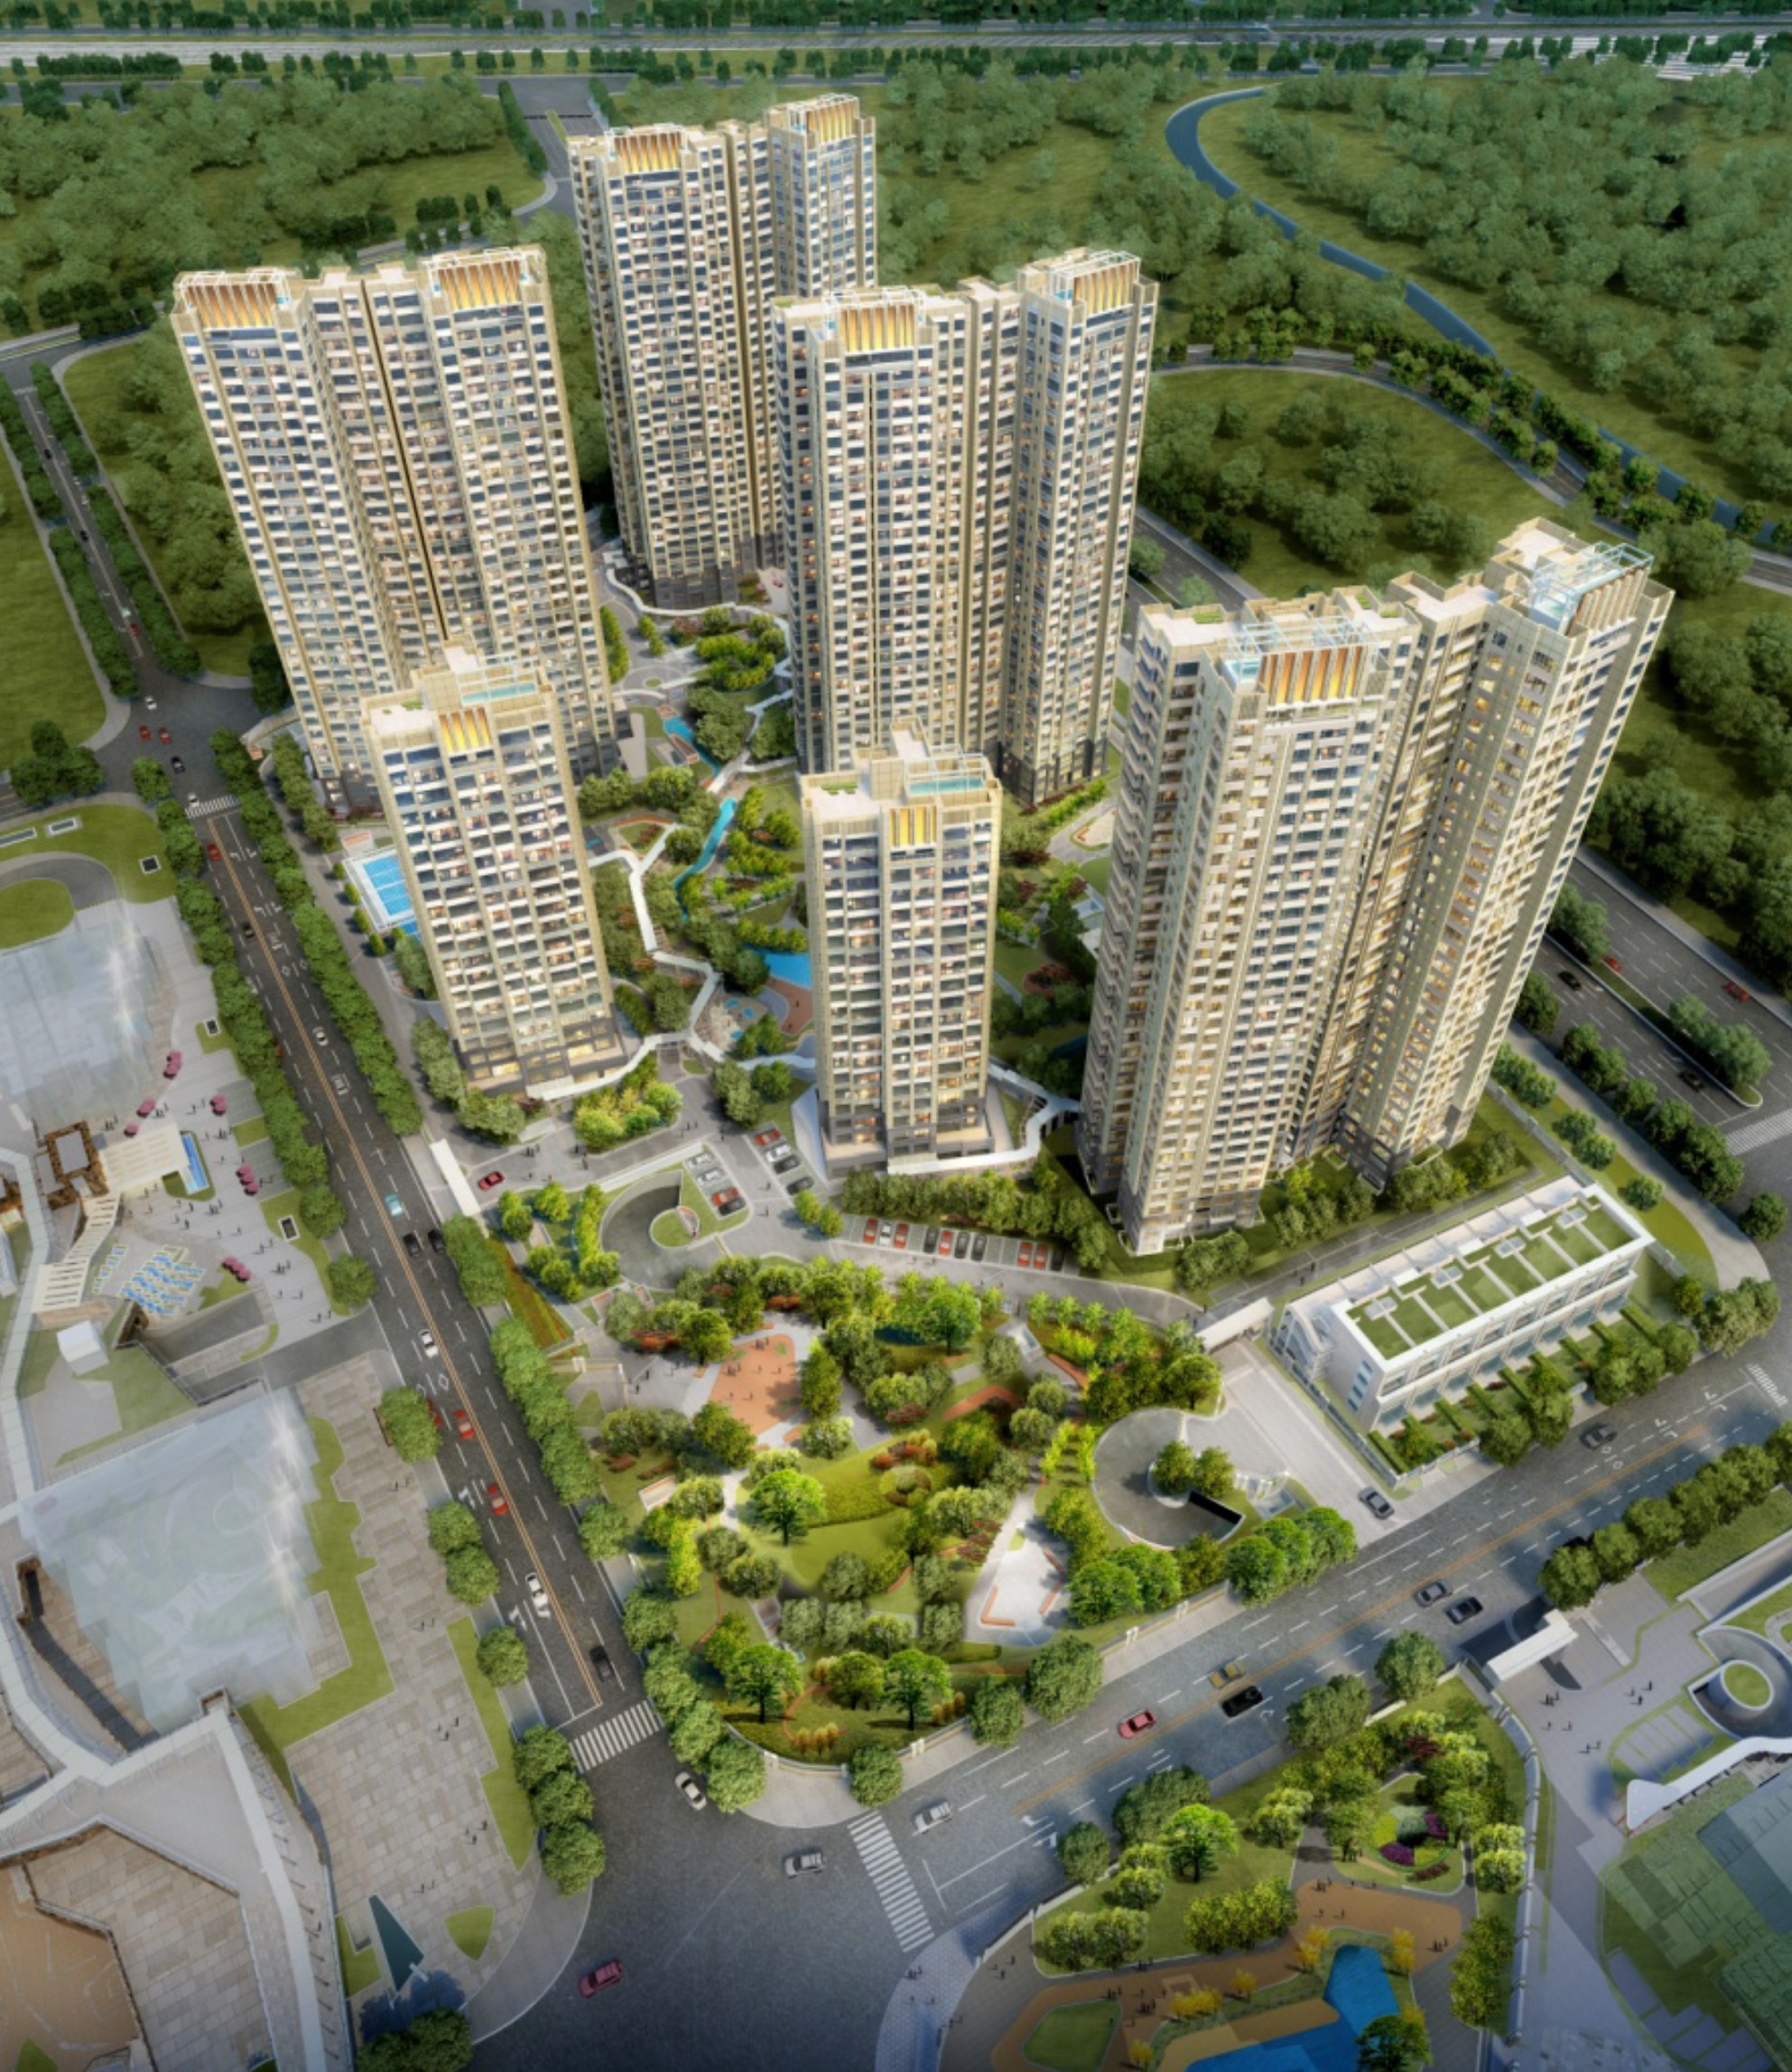 Flats in CK Asset Holdings’ Upper West Shanghai project were sold for an average of 90,000 yuan per square metre during the weekend sale that ended on June 17. Photo: Handout